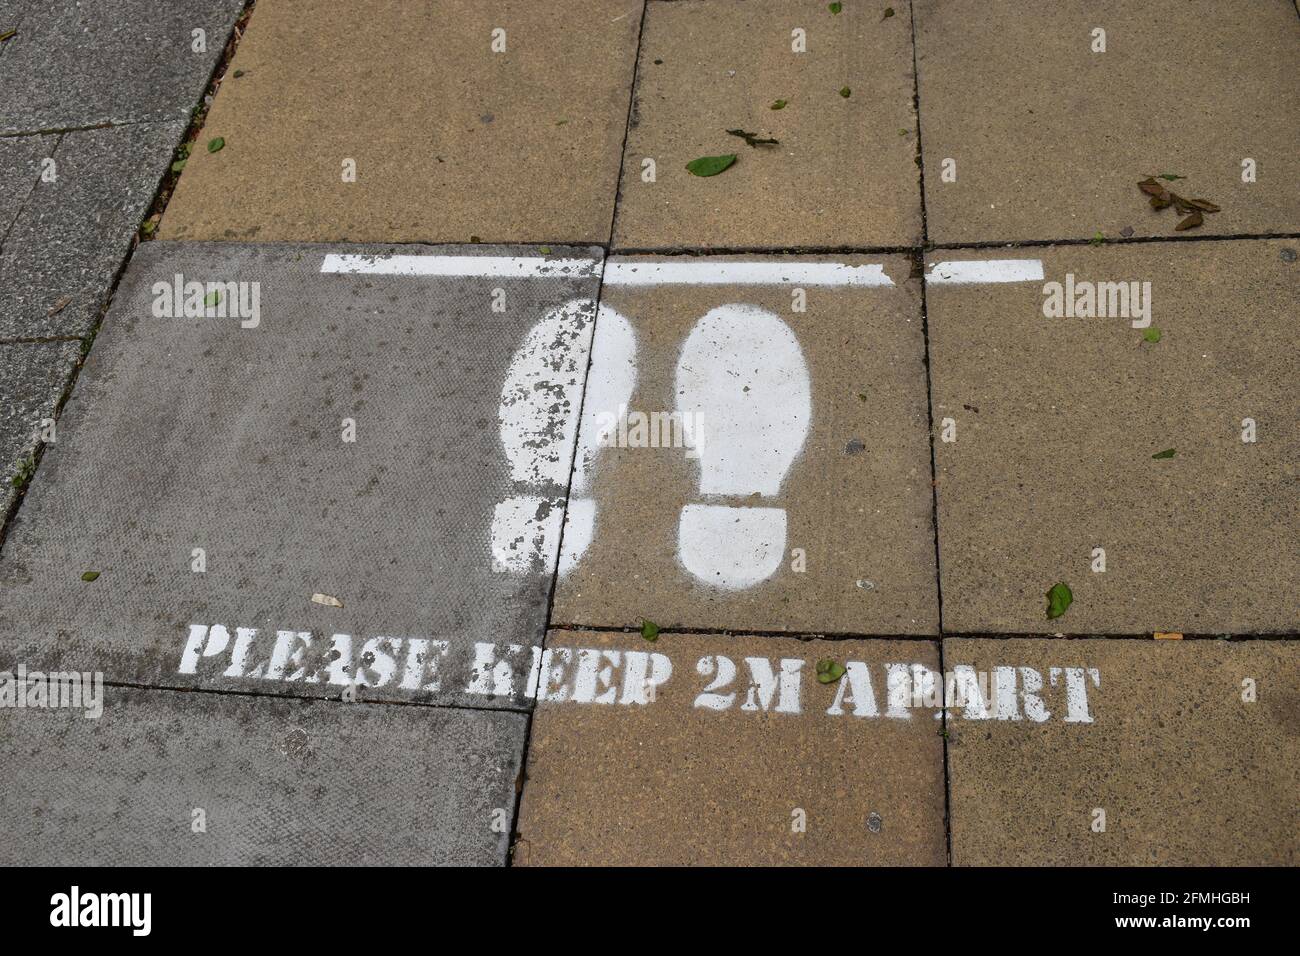 Social distancing notice on pavement: Please keep 2m apart. Stock Photo